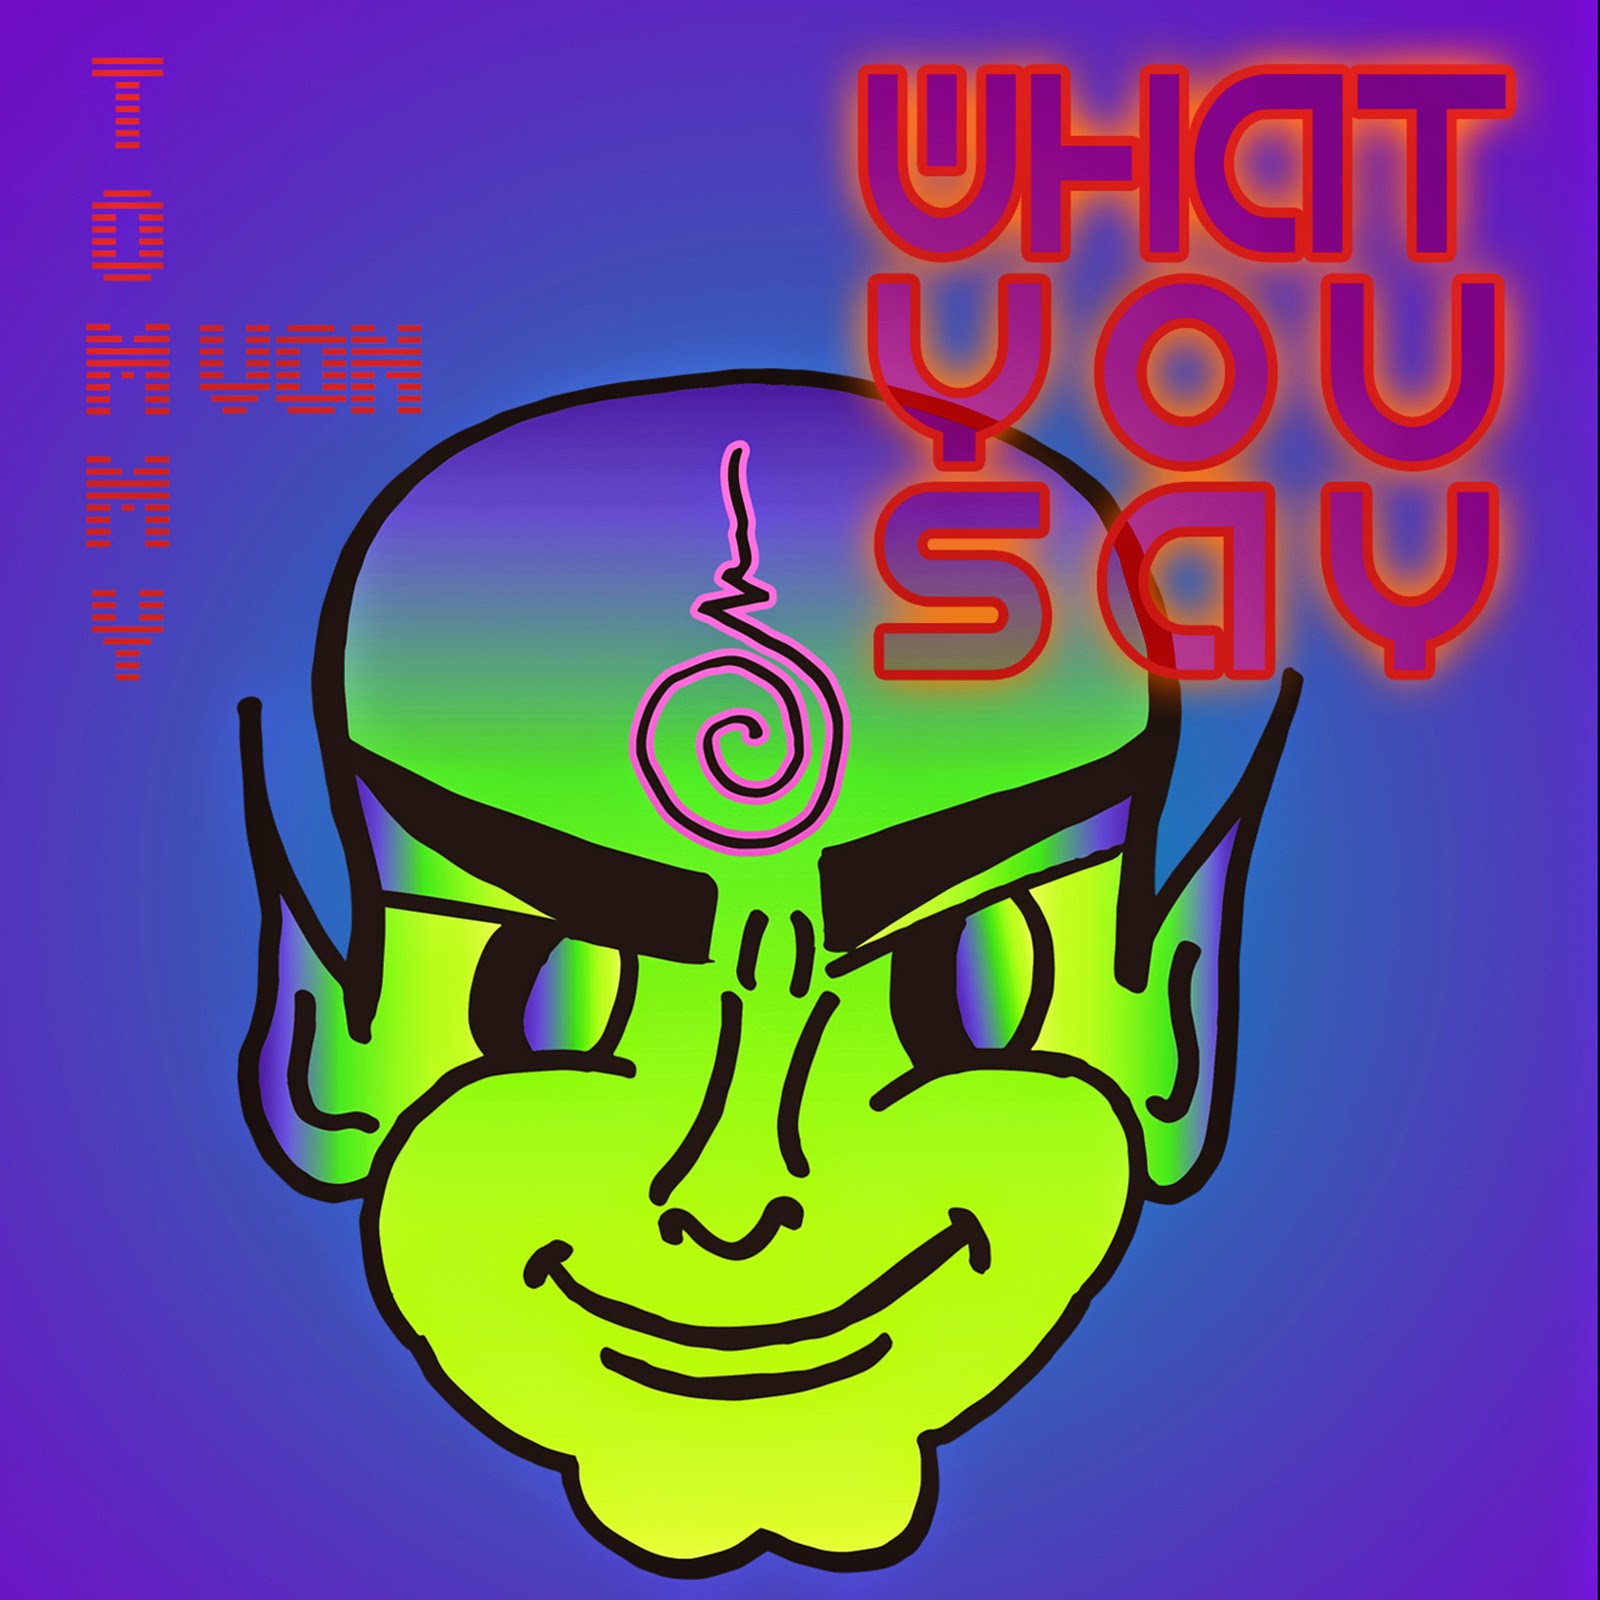 What You Say by Tommy Von